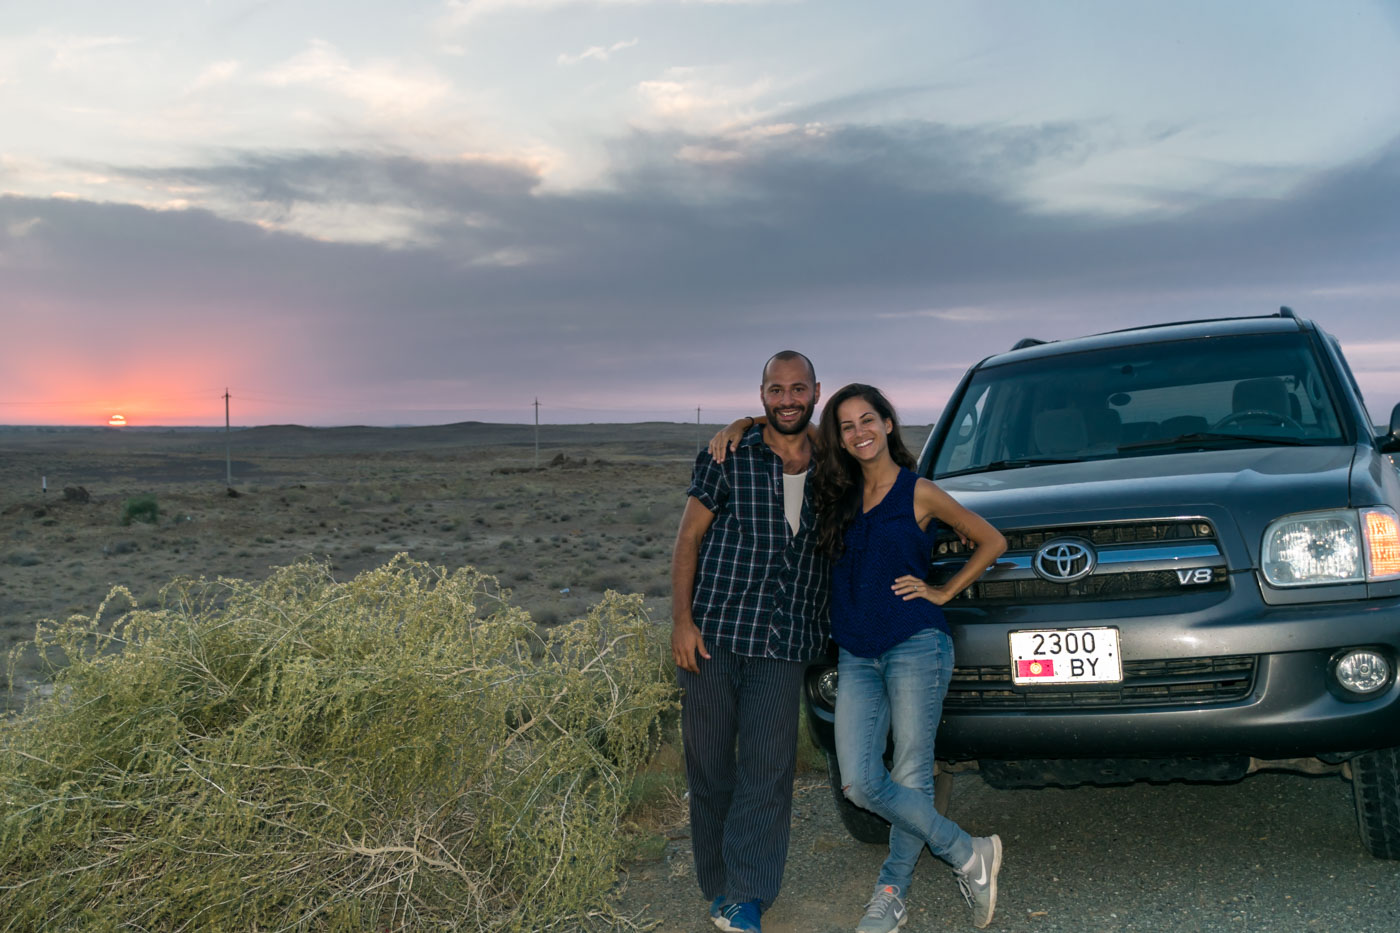 Tiago and Fernanda in front of the car in Kyrgyzstan with the sun setting in the background